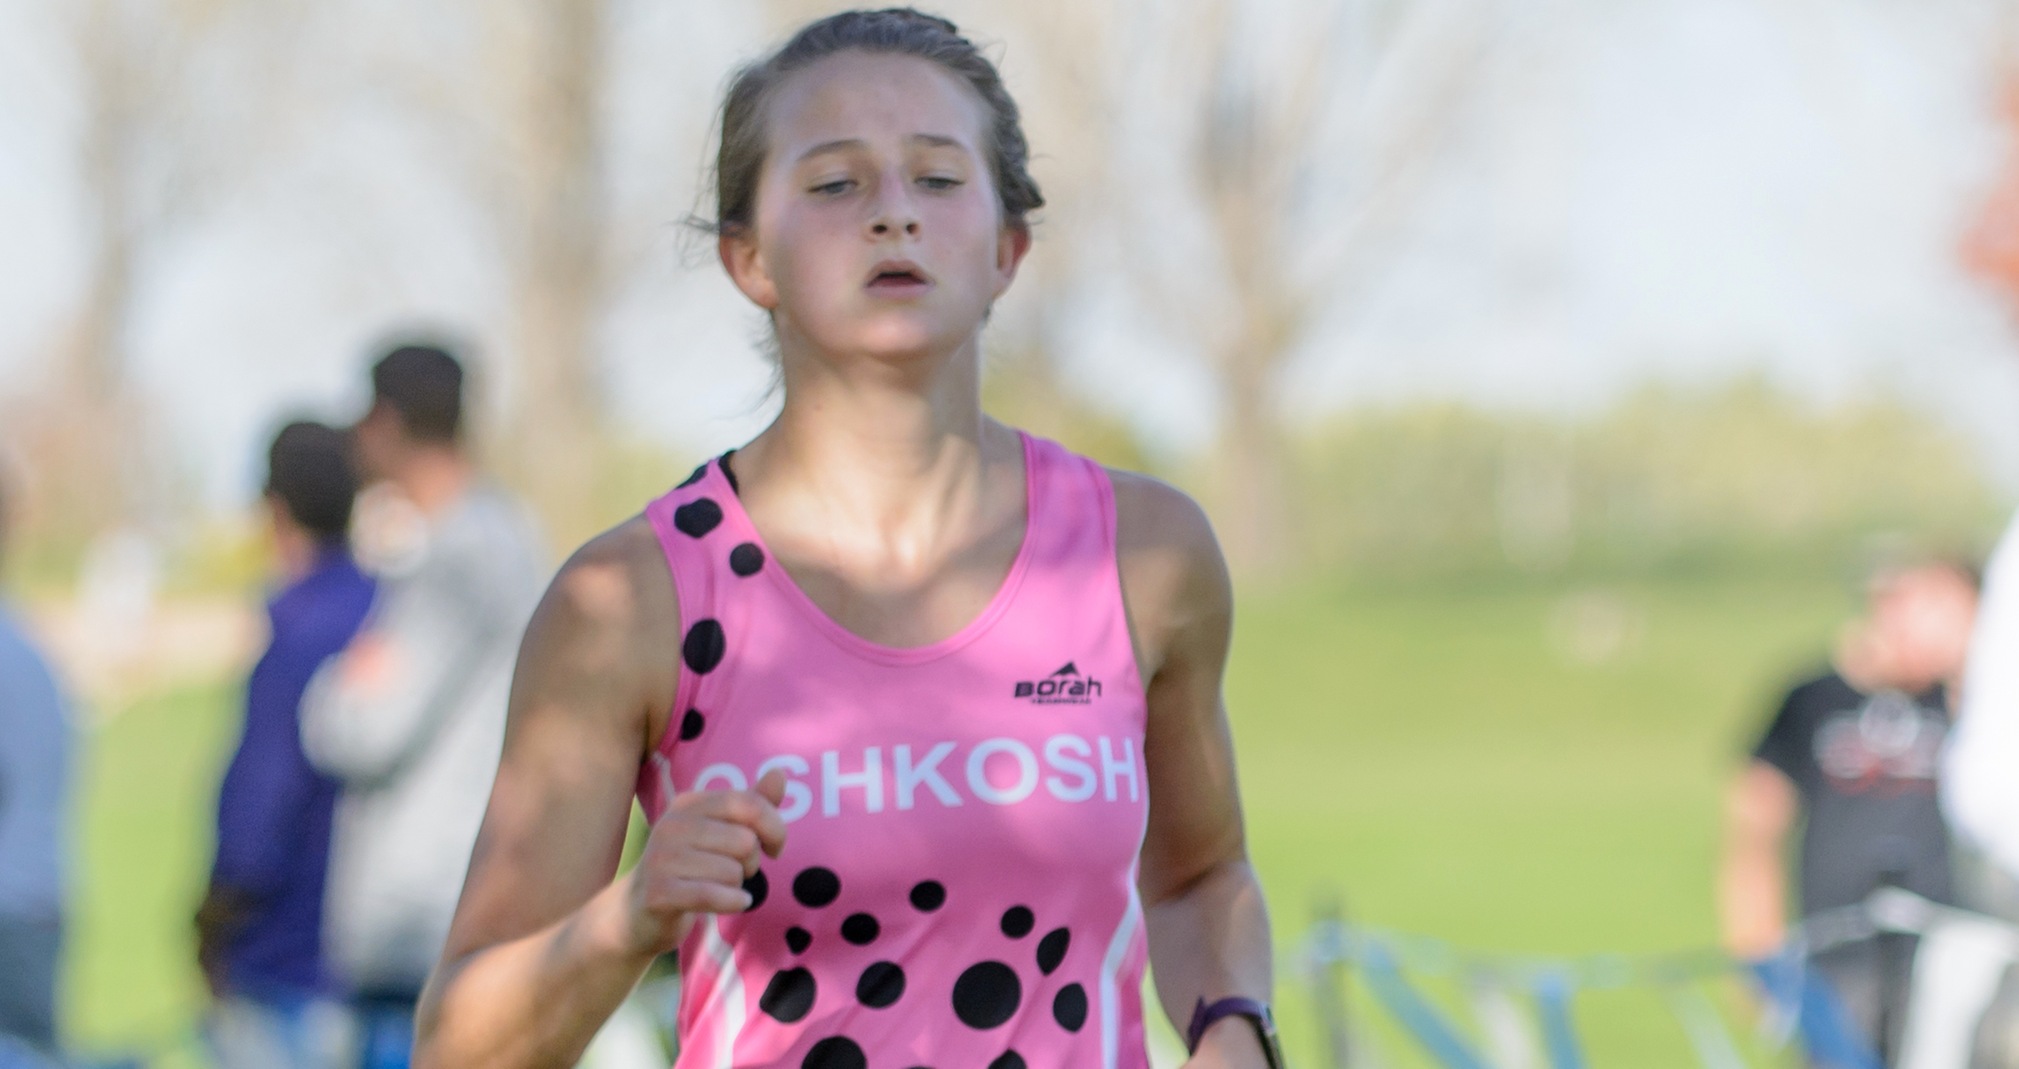 Lexus Brown finished seventh among the 38 runners at the UW-Oshkosh Open.